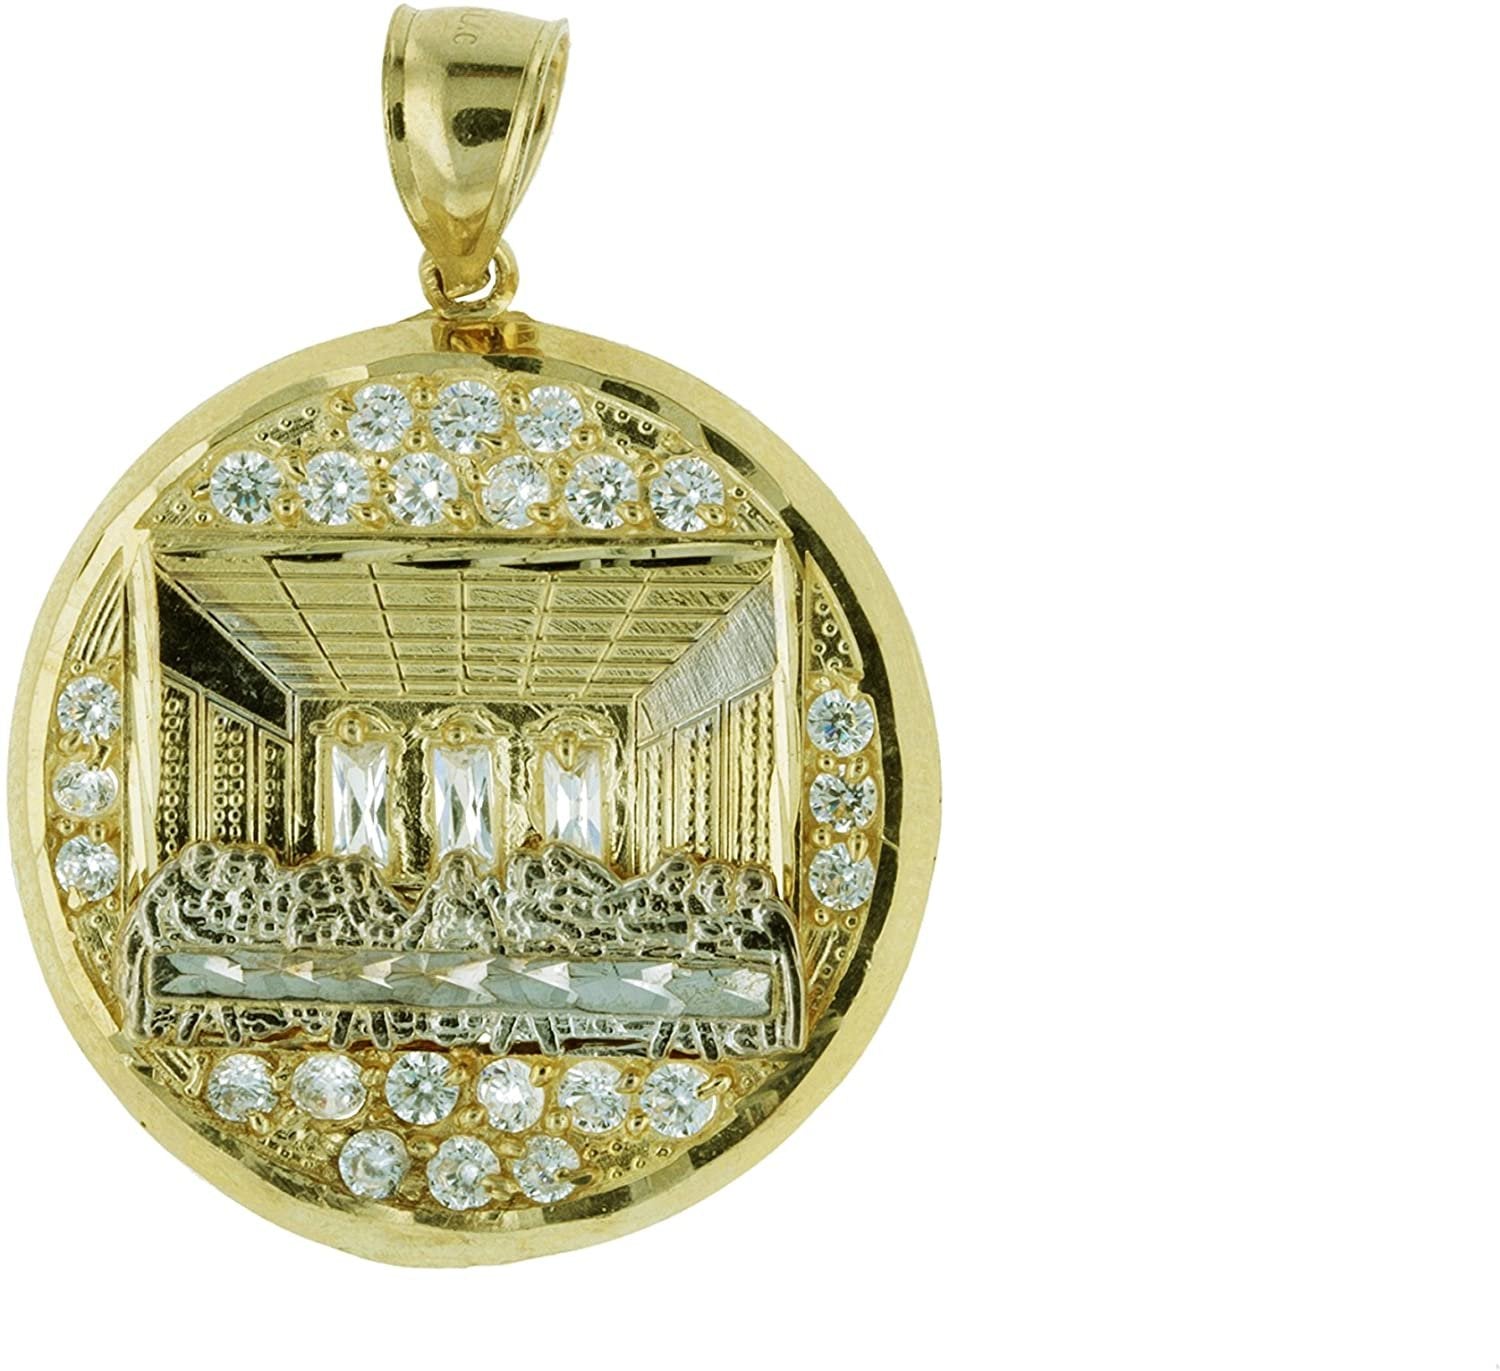 10k Yellow and White Gold The Last Supper Pendant Necklace with CZ Gem Stones